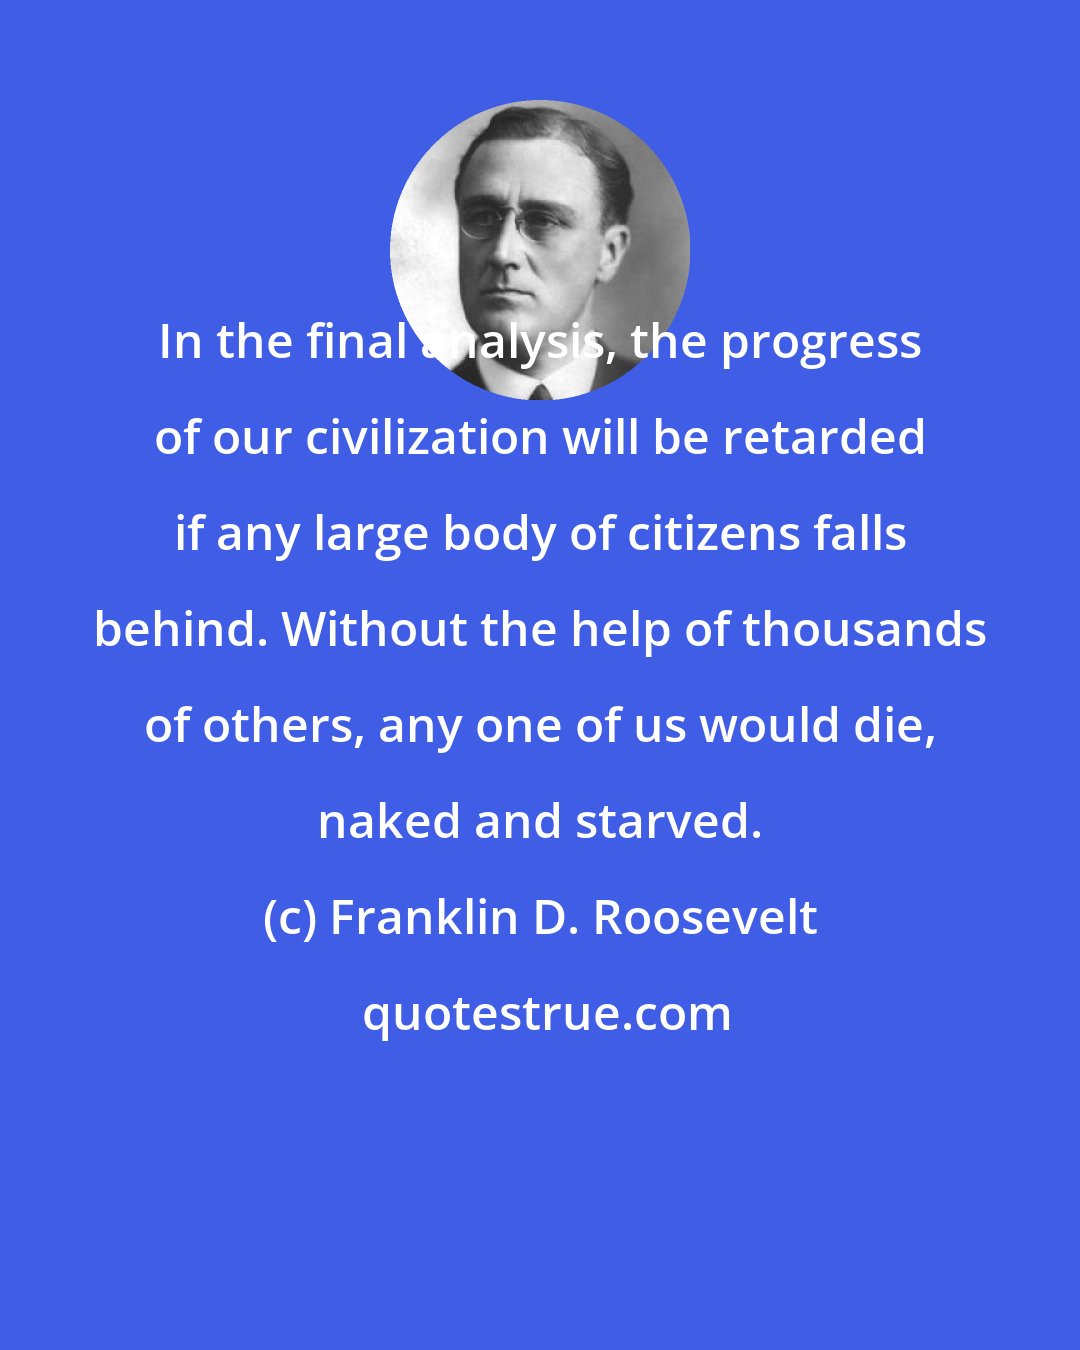 Franklin D. Roosevelt: In the final analysis, the progress of our civilization will be retarded if any large body of citizens falls behind. Without the help of thousands of others, any one of us would die, naked and starved.